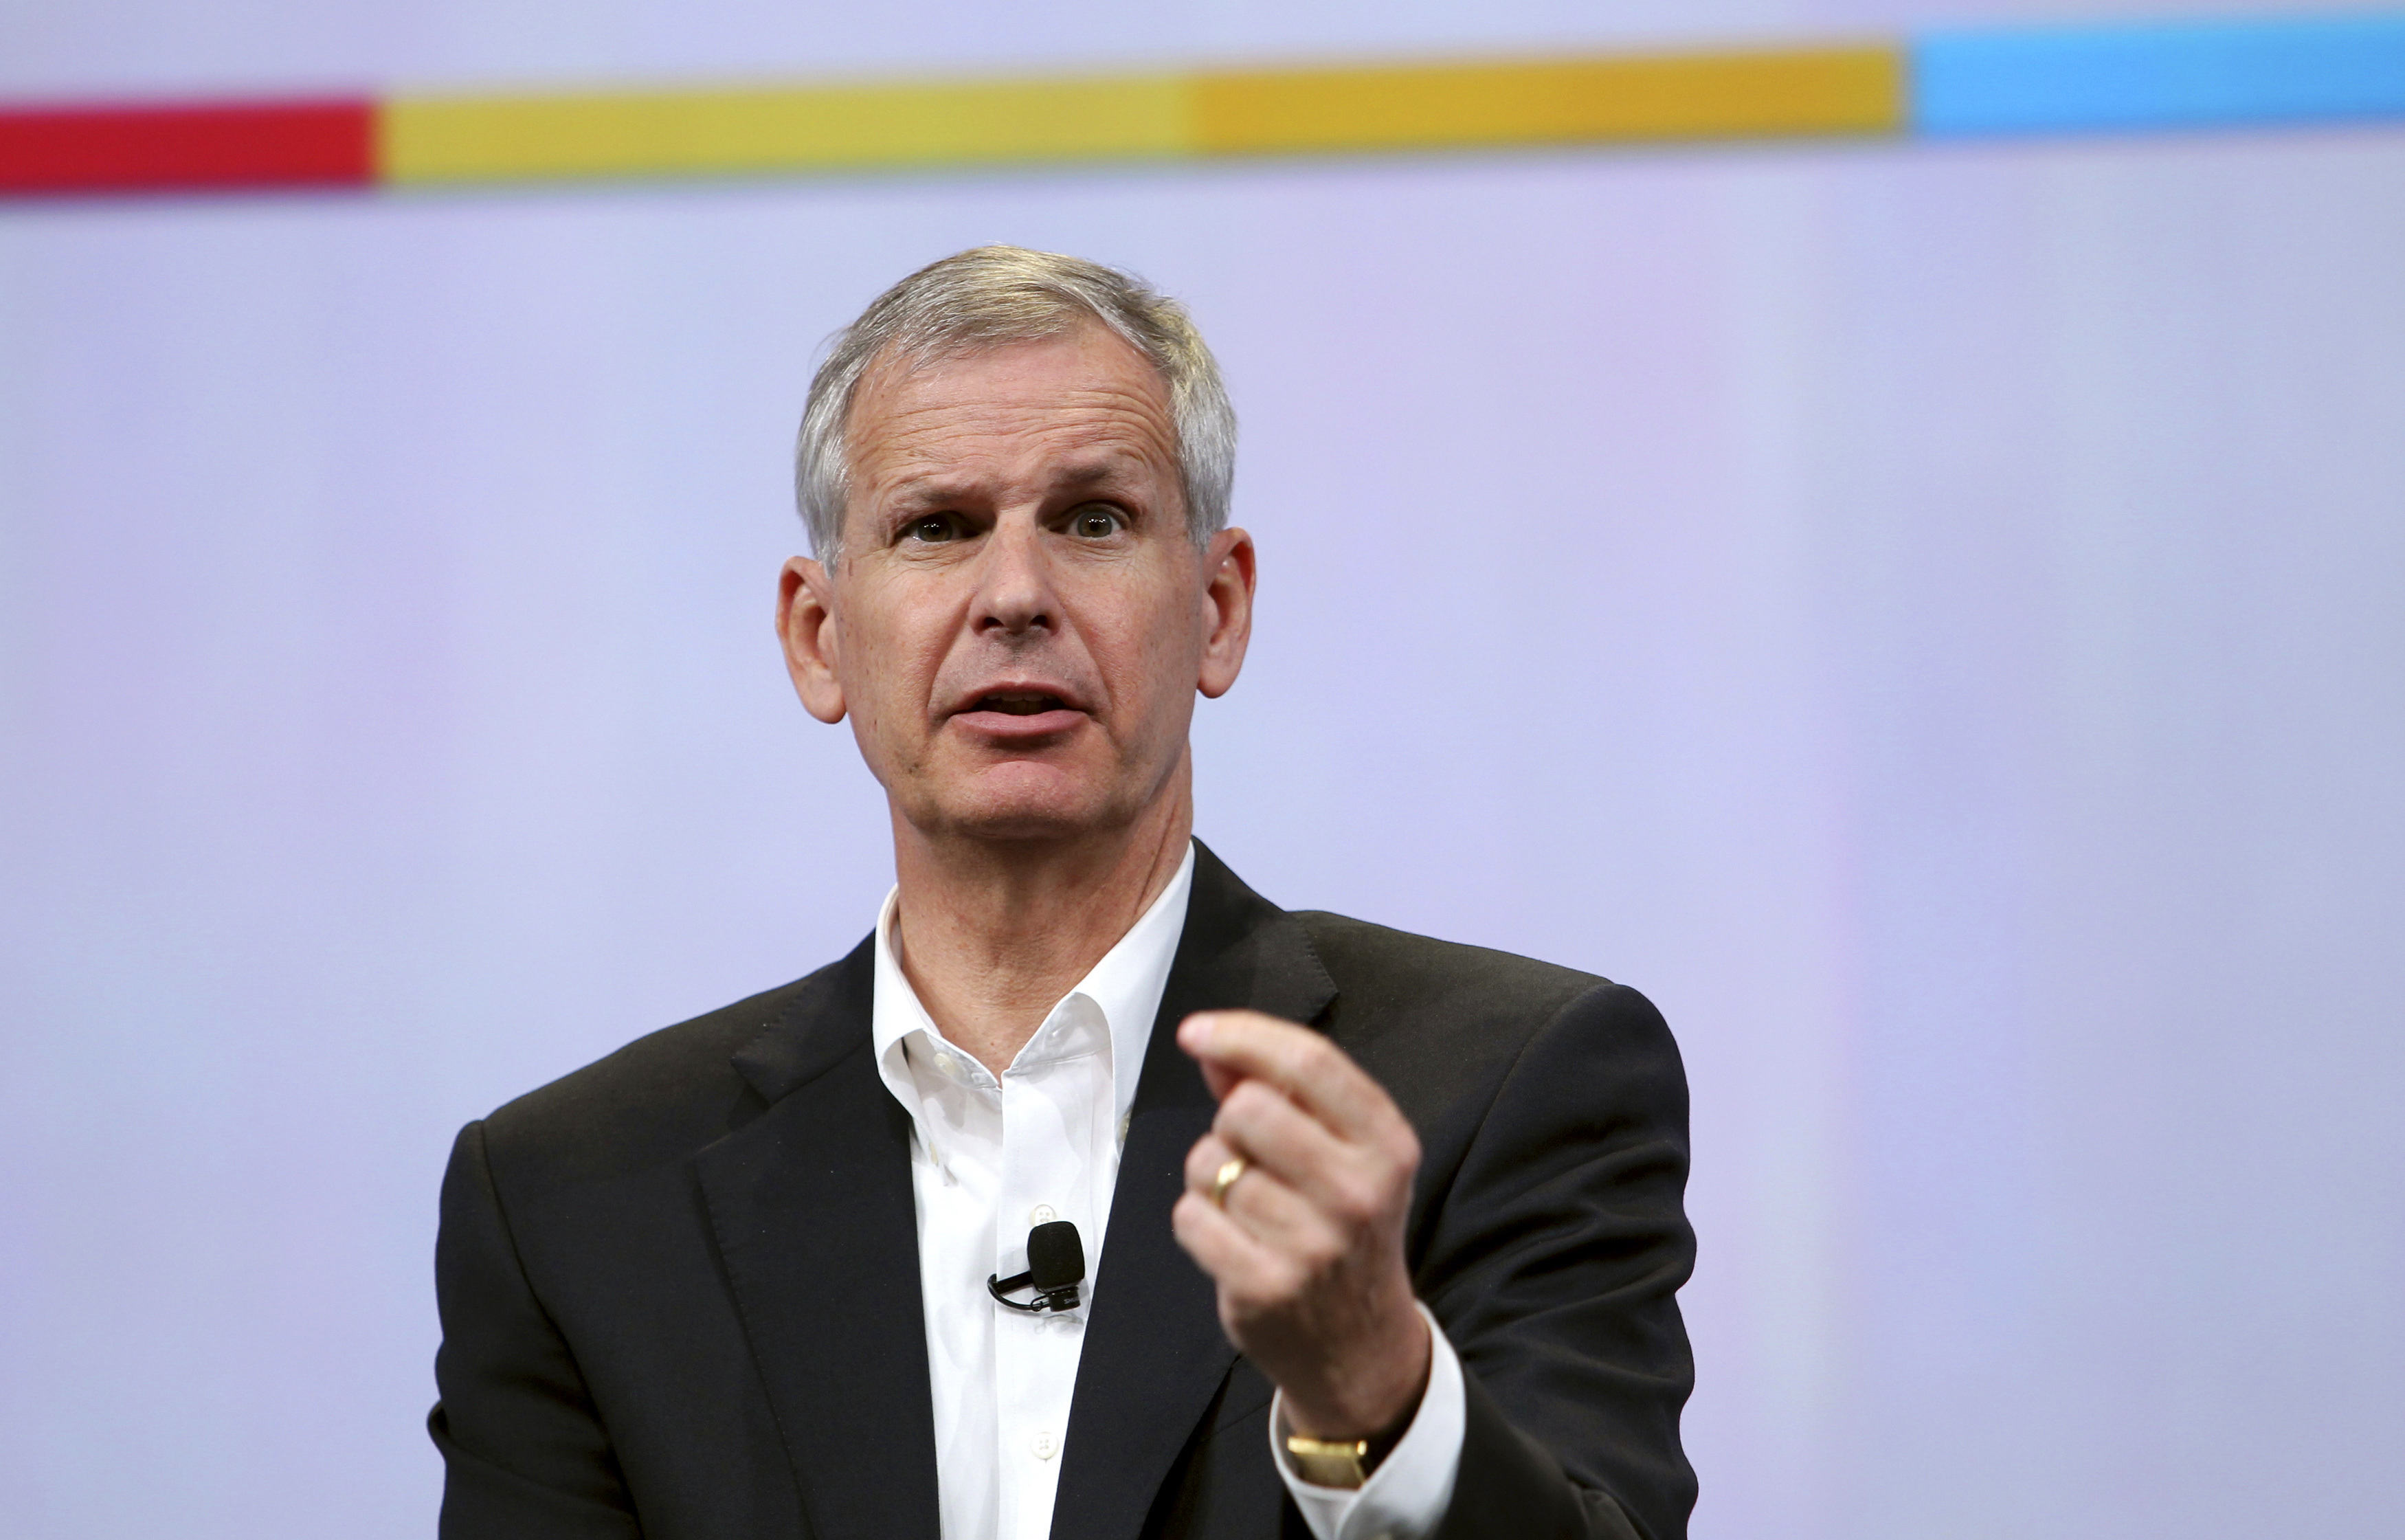 Dish Network Chairman Charlie Ergen speaks during Google's annual developers conference in San Francisco